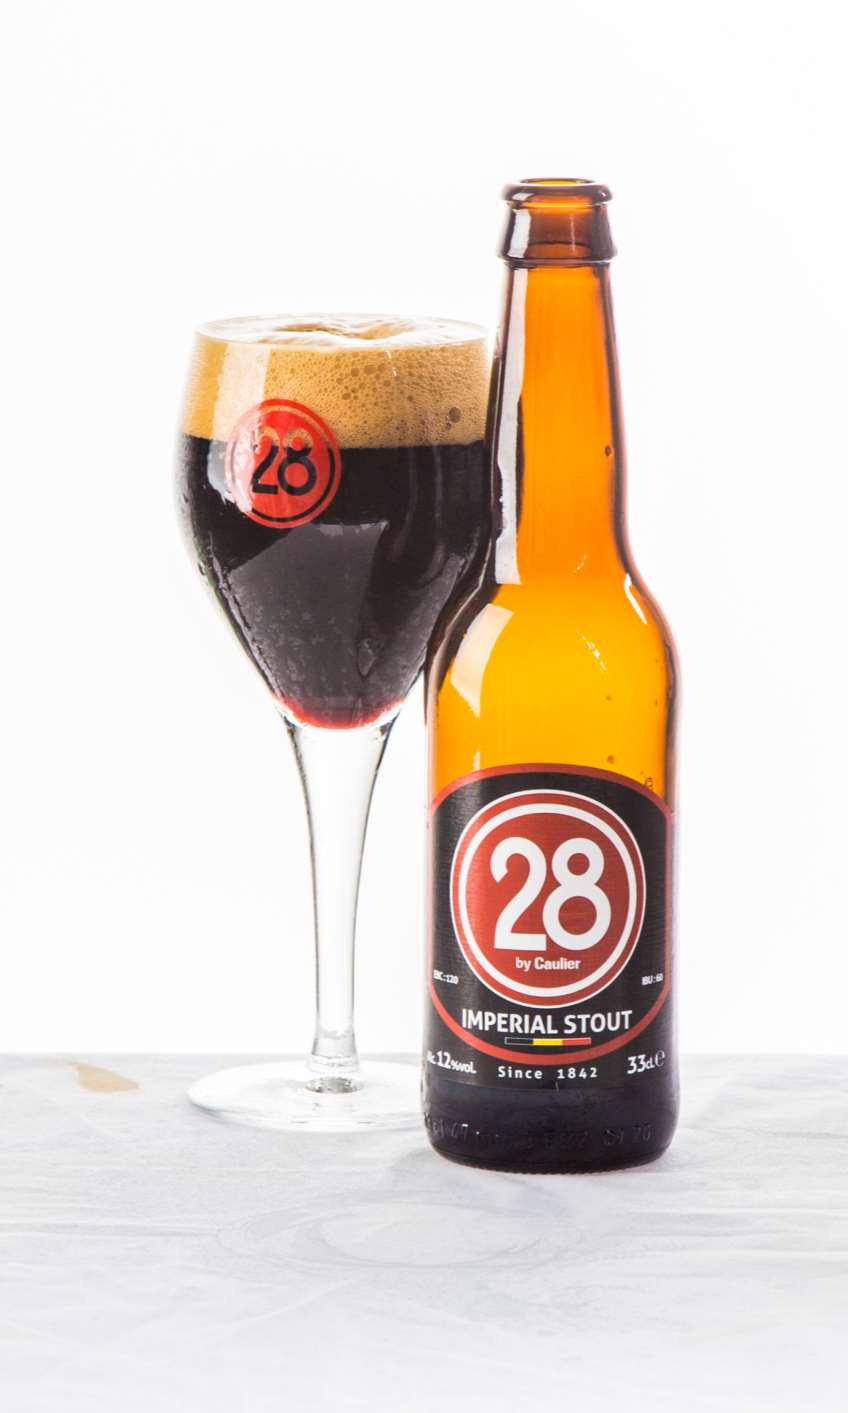 28 Imperial Stout